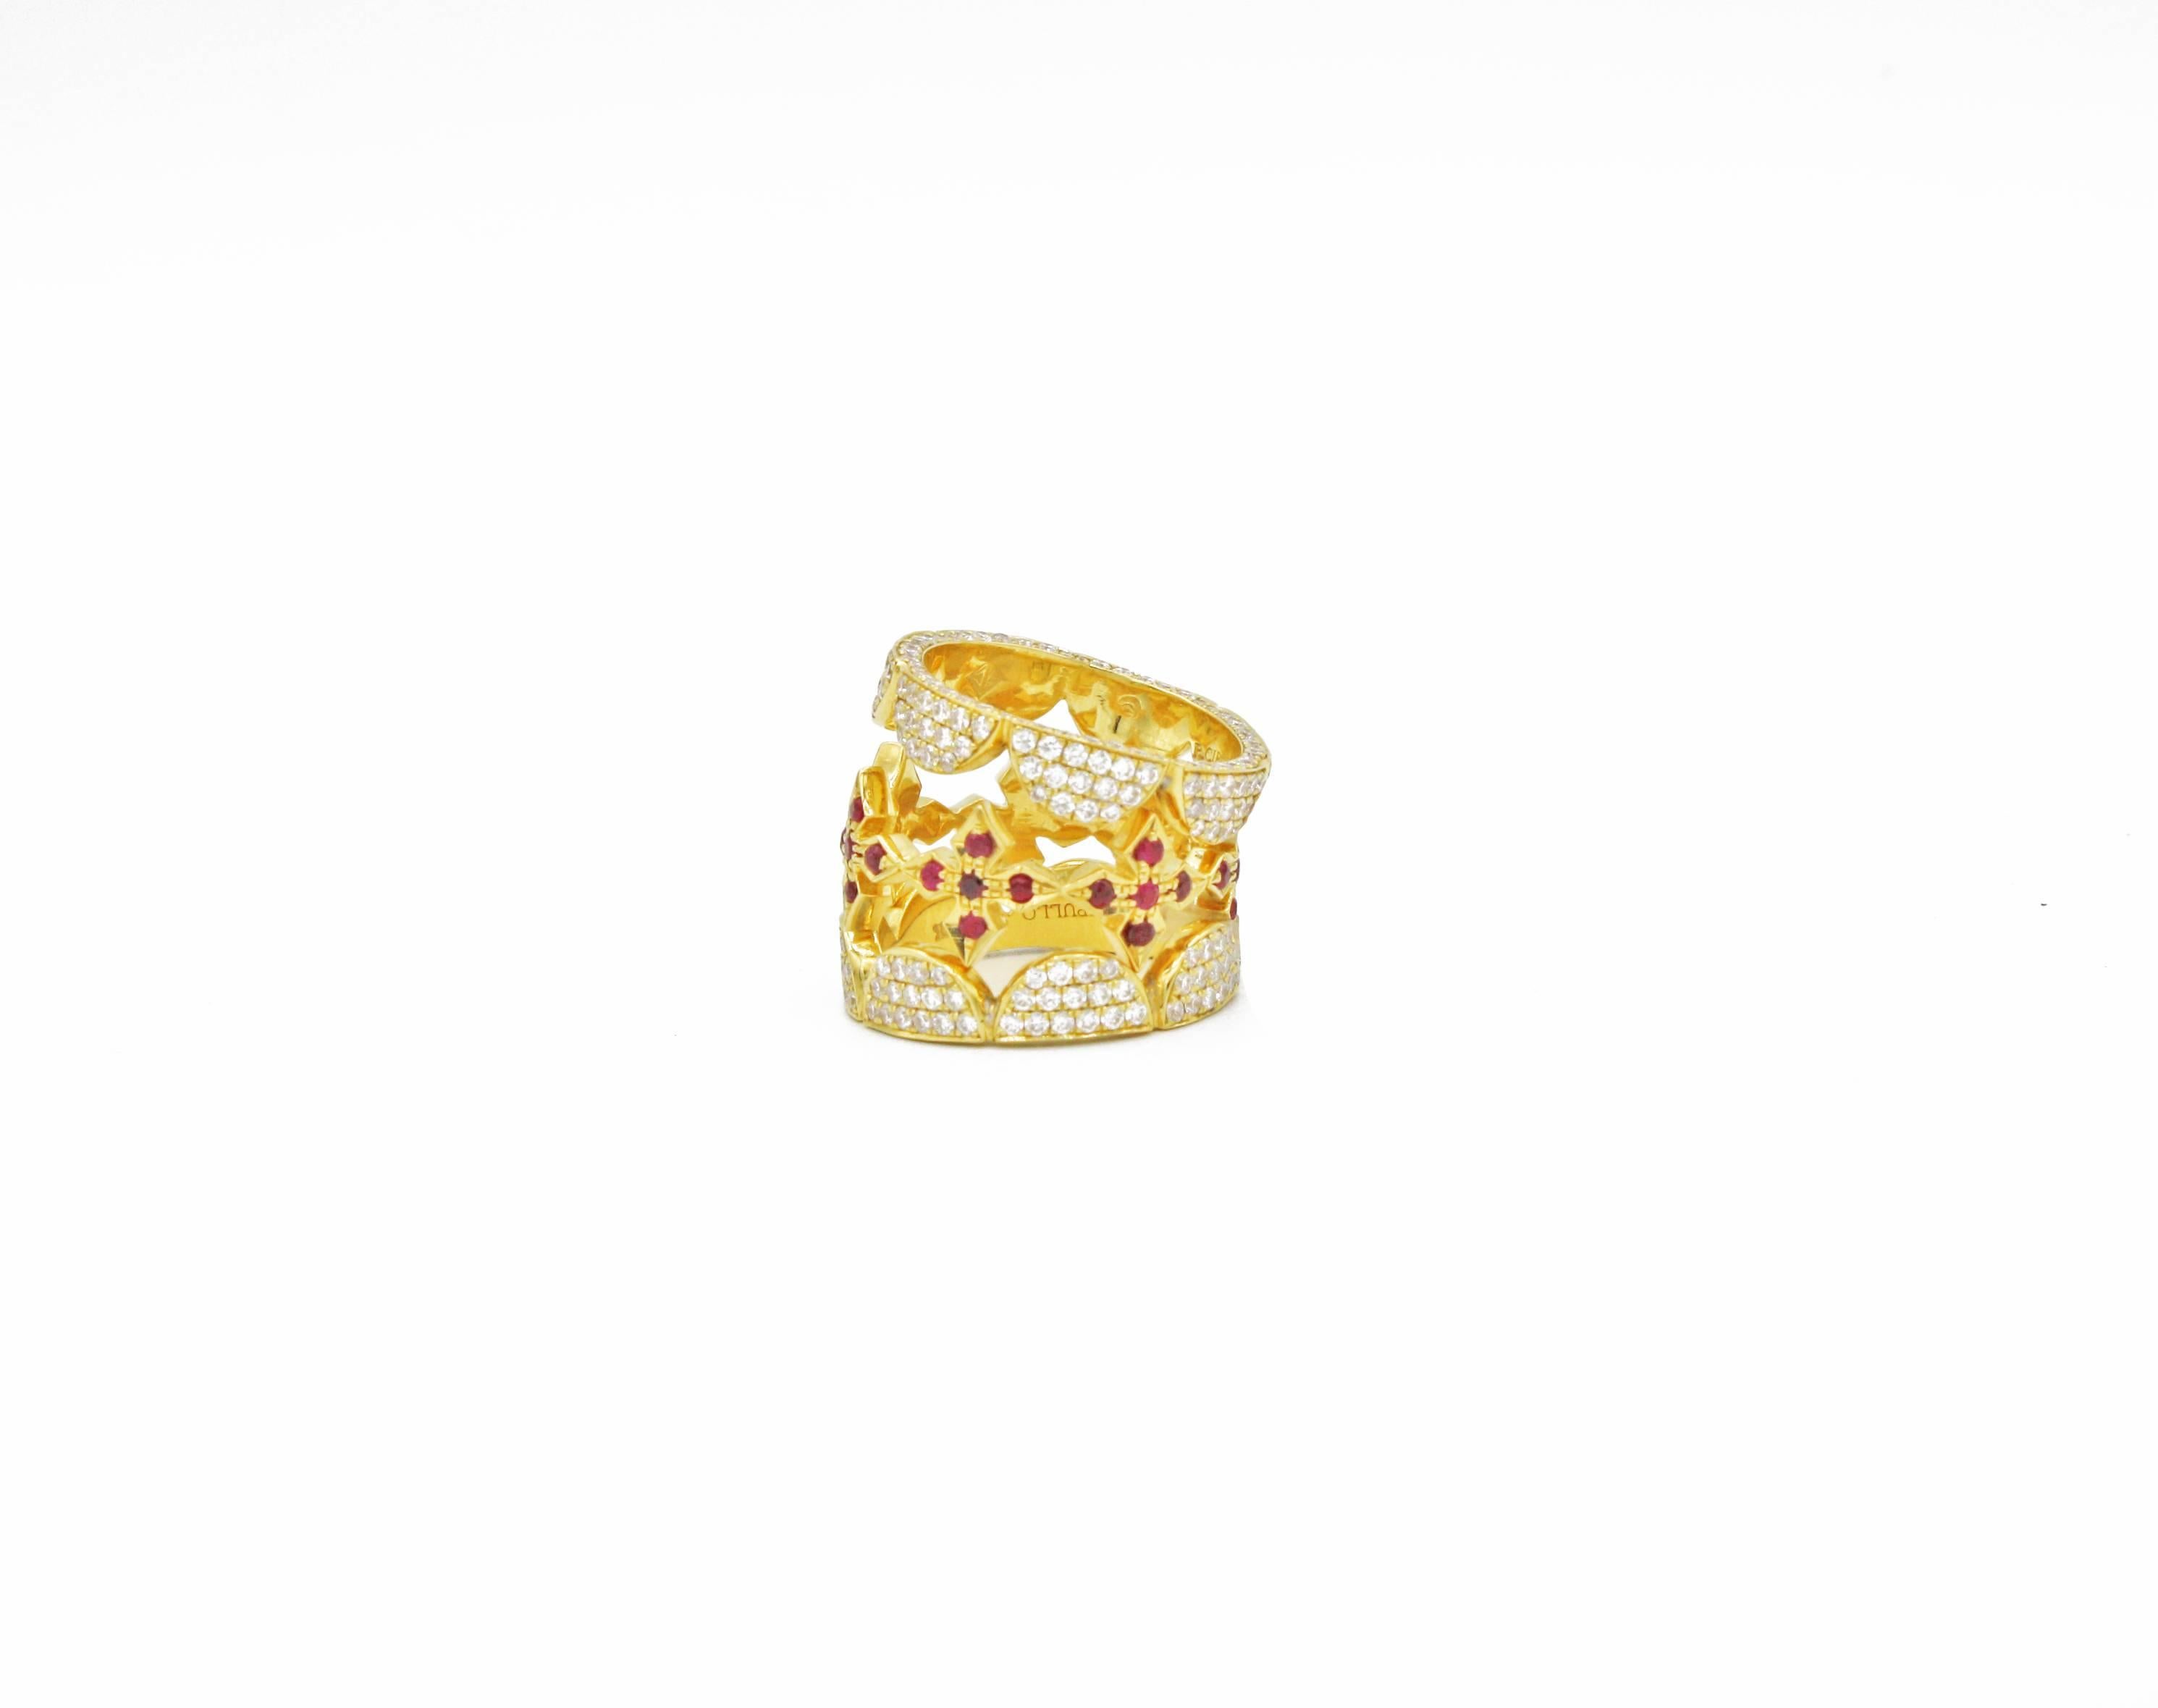 One of Renato Cipullo's latest designs, these stacking rings are comprised of 18kt yellow gold, 2.20 cts diamonds (G color, VS clarity), and 0.47 cts rubies.  This versatile set of rings can be worn individually or in a variety of